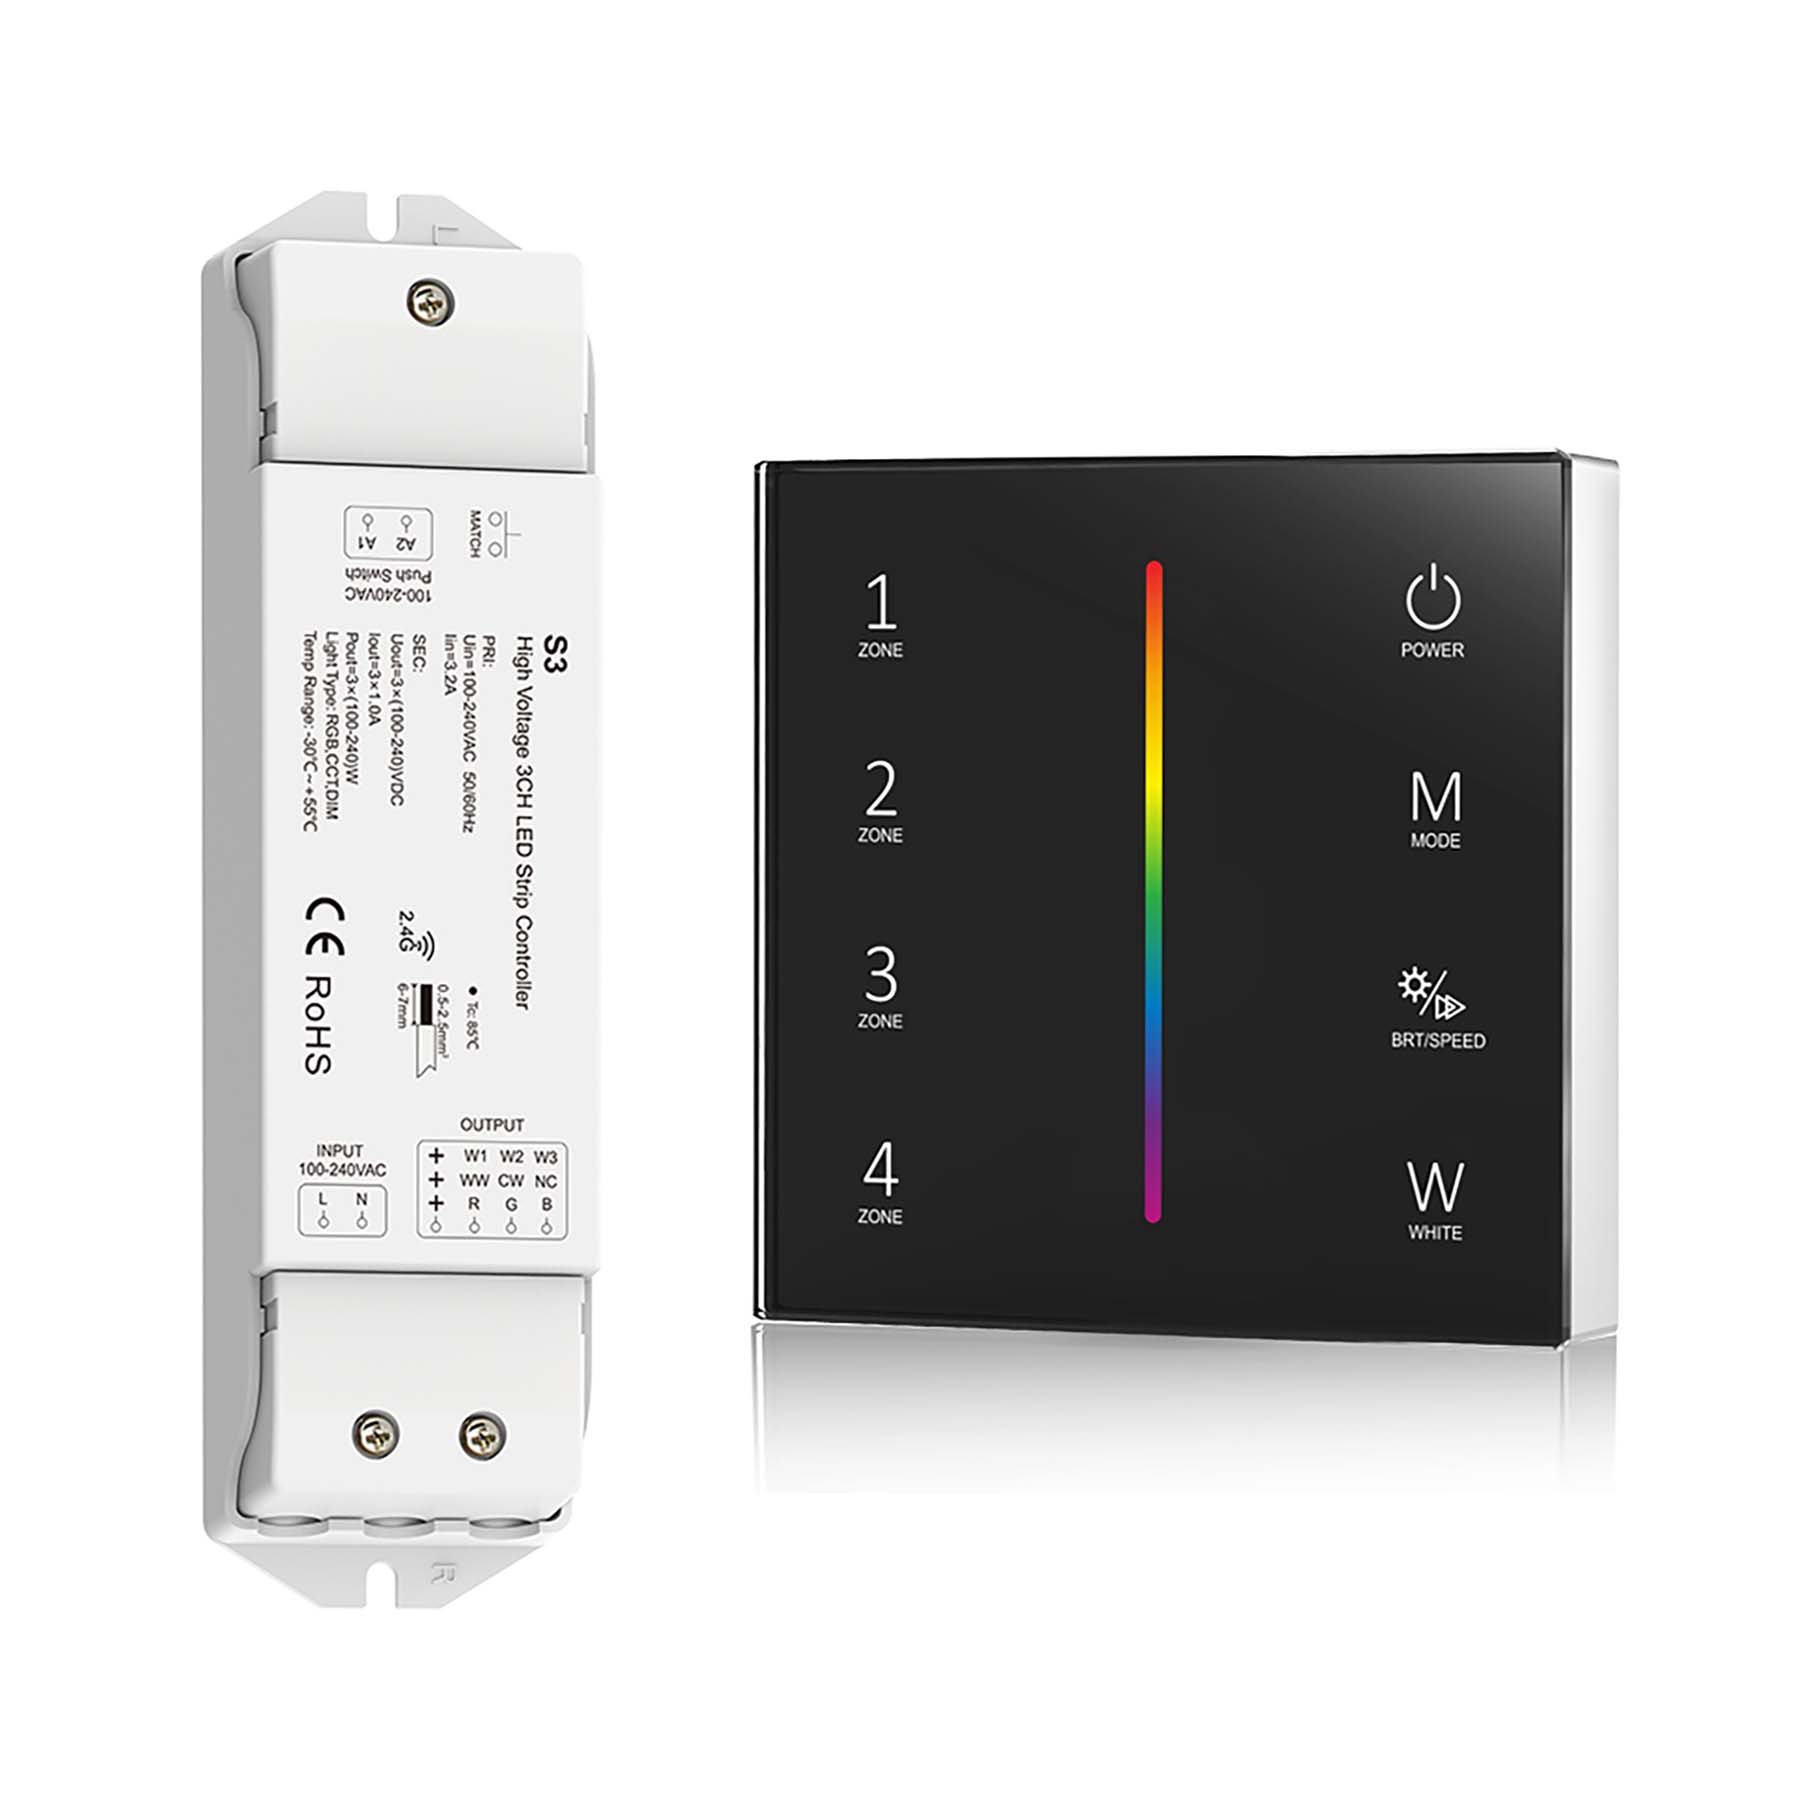 G.W.S. LED Black LED 100-240V AC RGB/RGBW Controller S3 + 4 Zone Panel Remote Control 2*AAA Battery T24